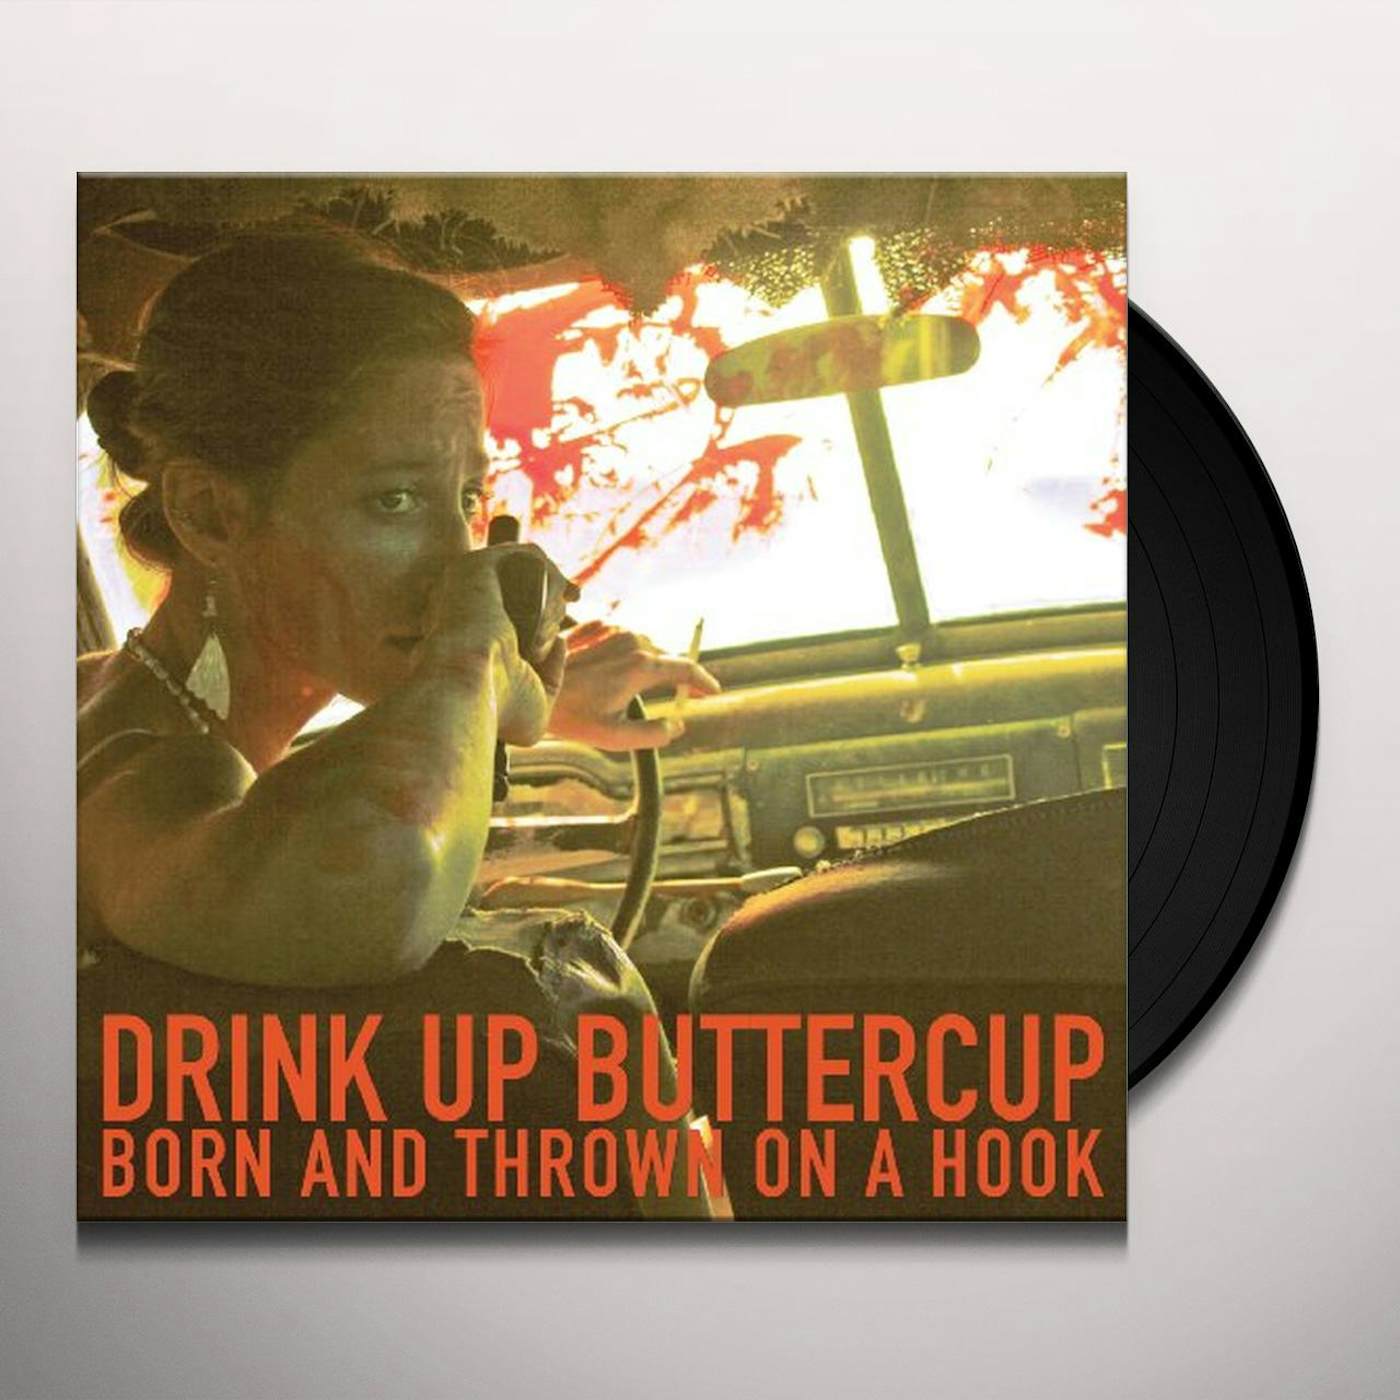 Drink Up Buttercup Born And Thrown On A Hook Vinyl Record